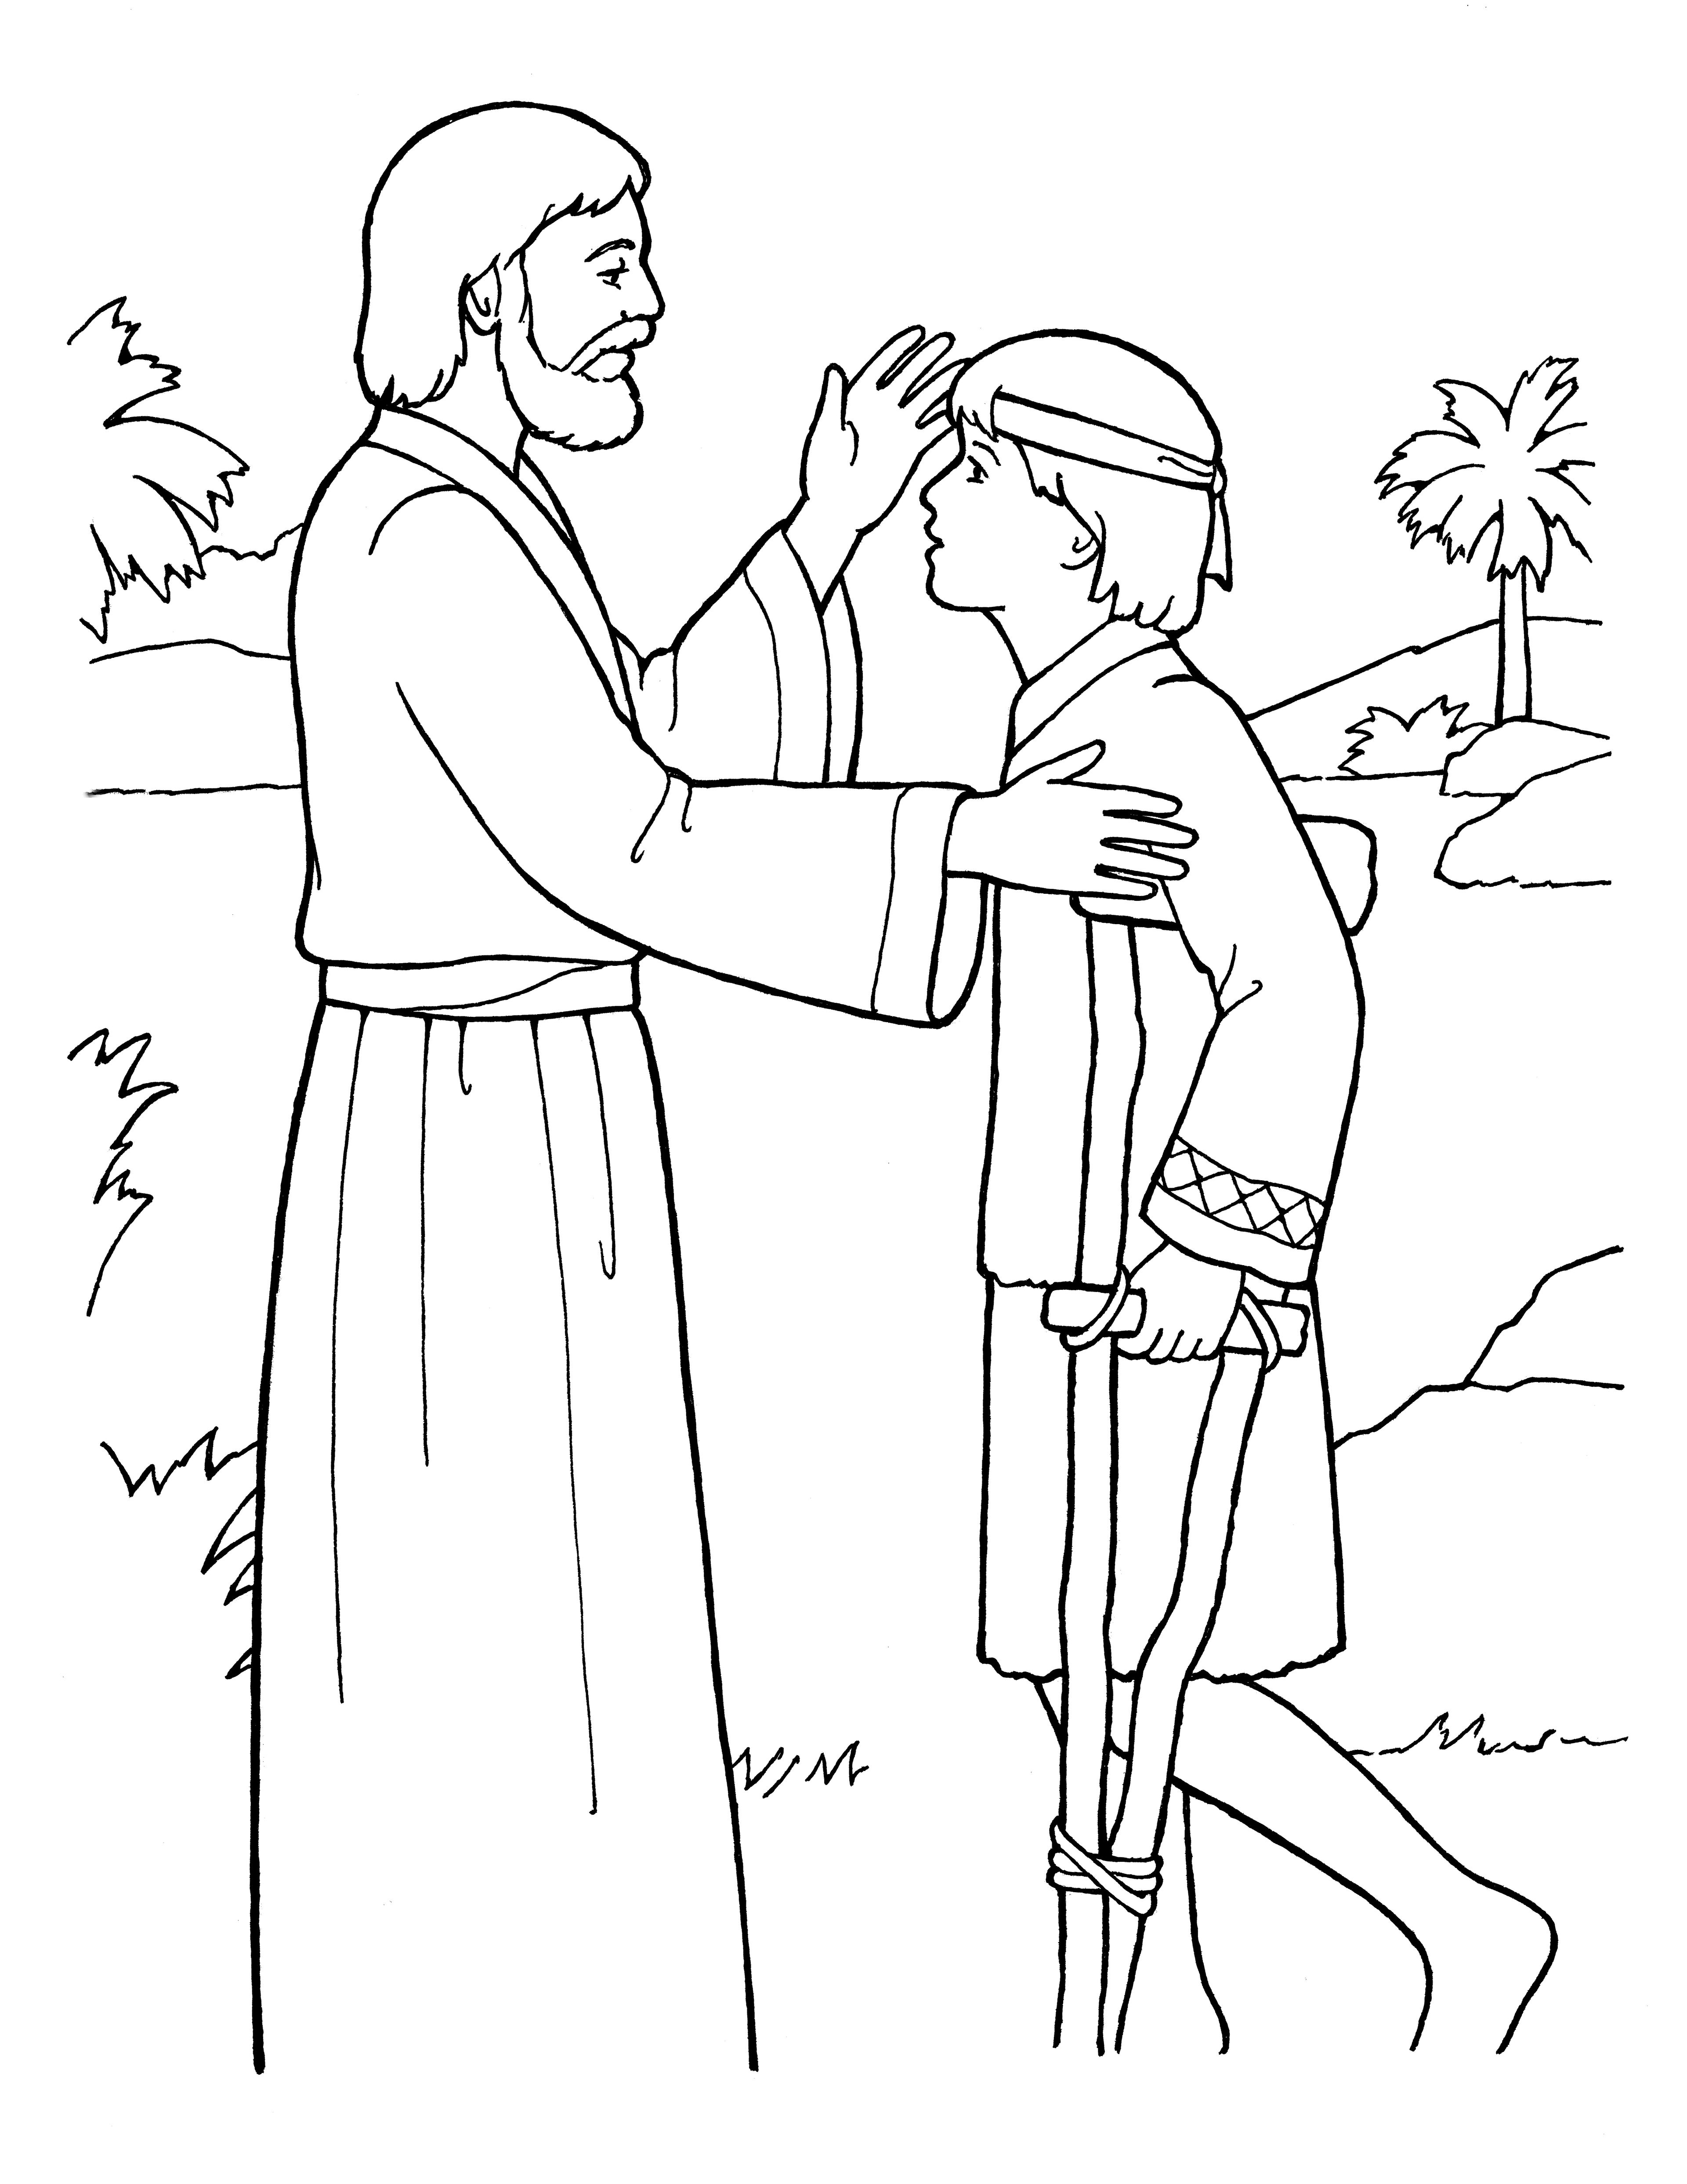 An illustration of Christ healing the sick, from the nursery manual Behold Your Little Ones (2008), page 95.